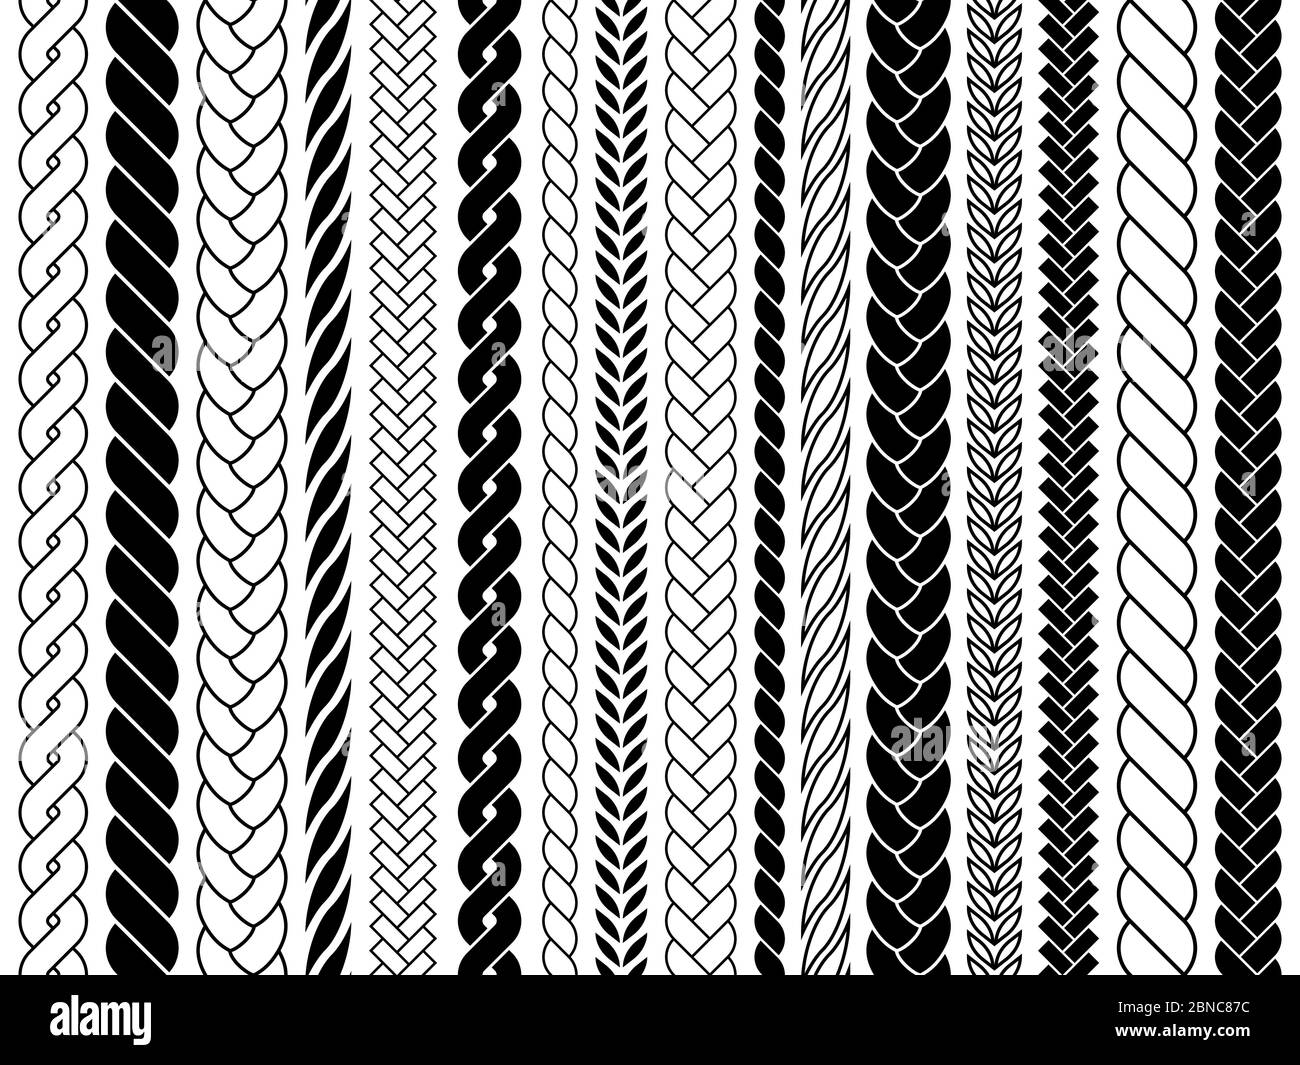 Braid fabric Stock Vector Images - Alamy